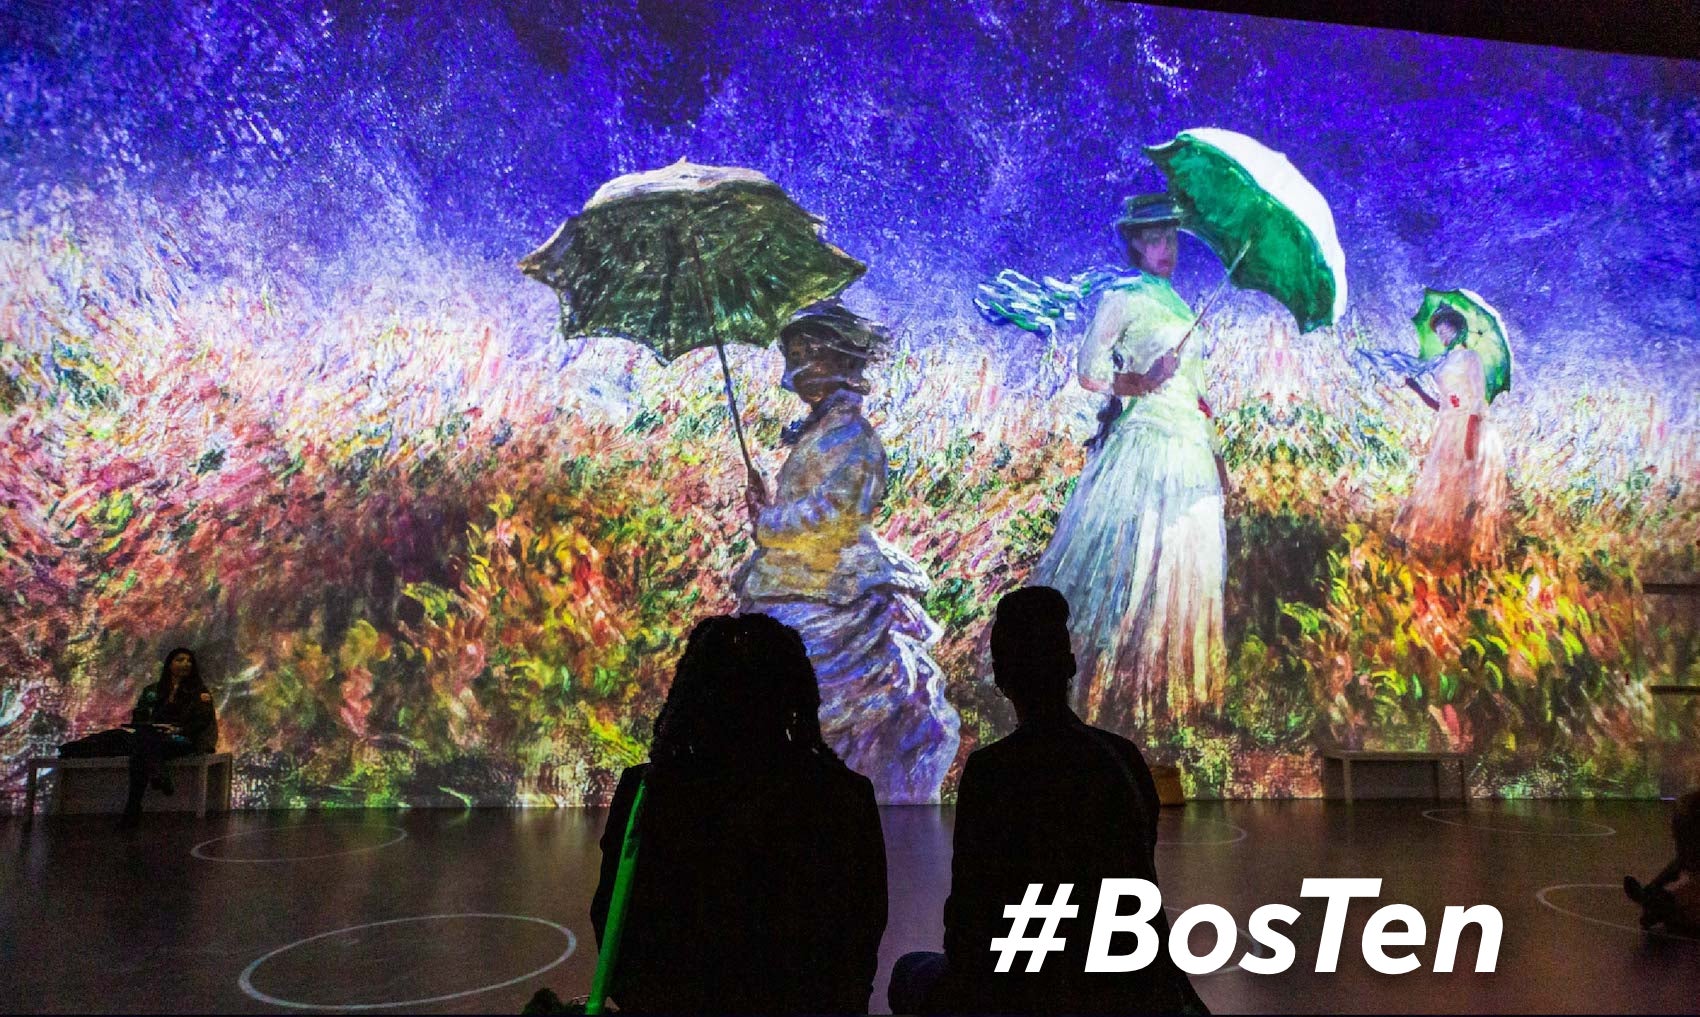 Immersive Monet & The Impressionists debuts in Boston this week.